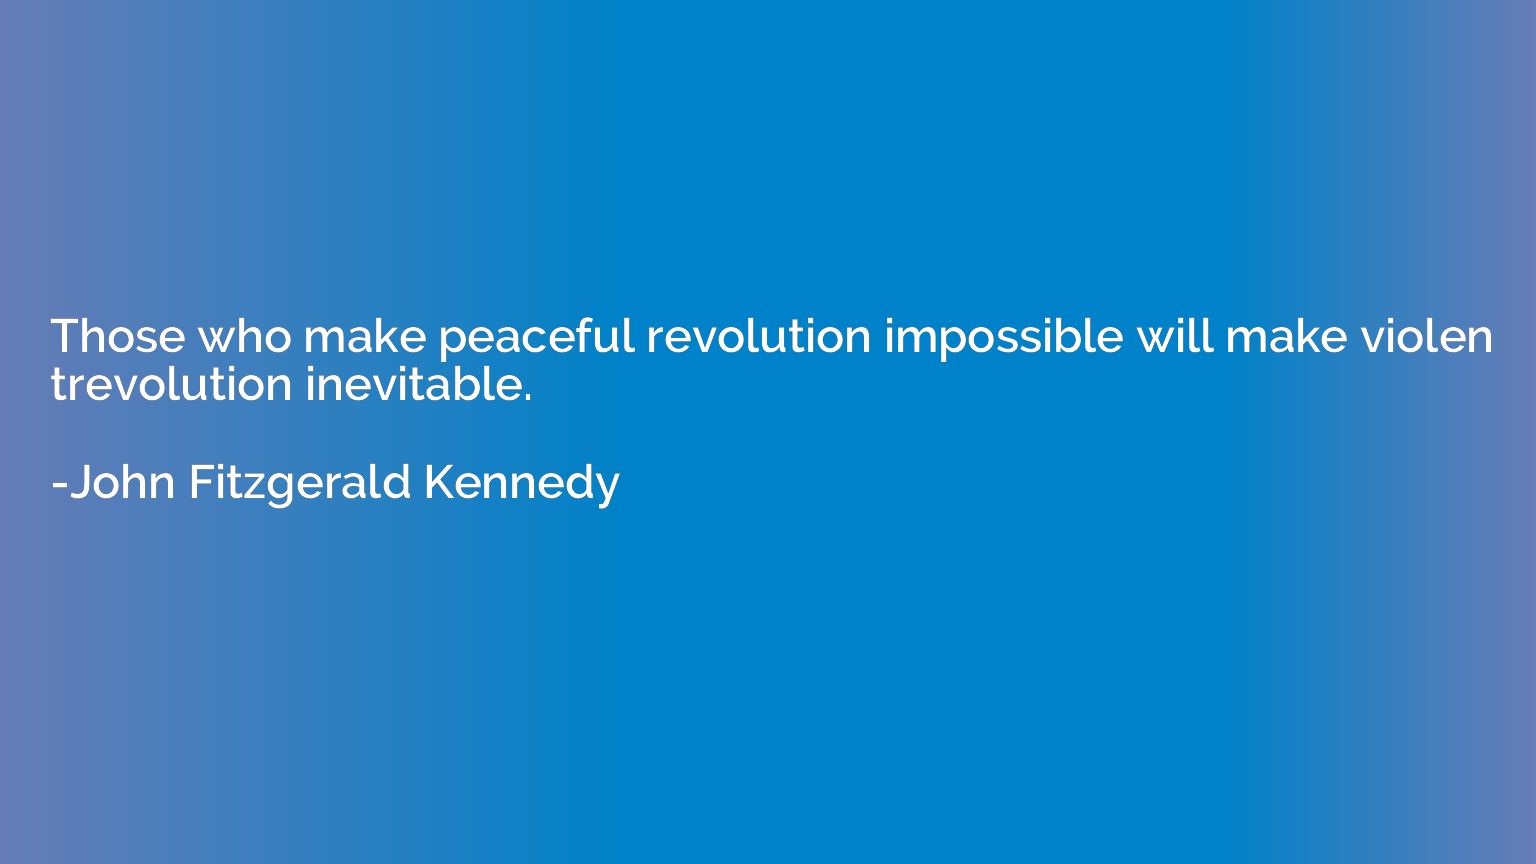 Those who make peaceful revolution impossible will make viol